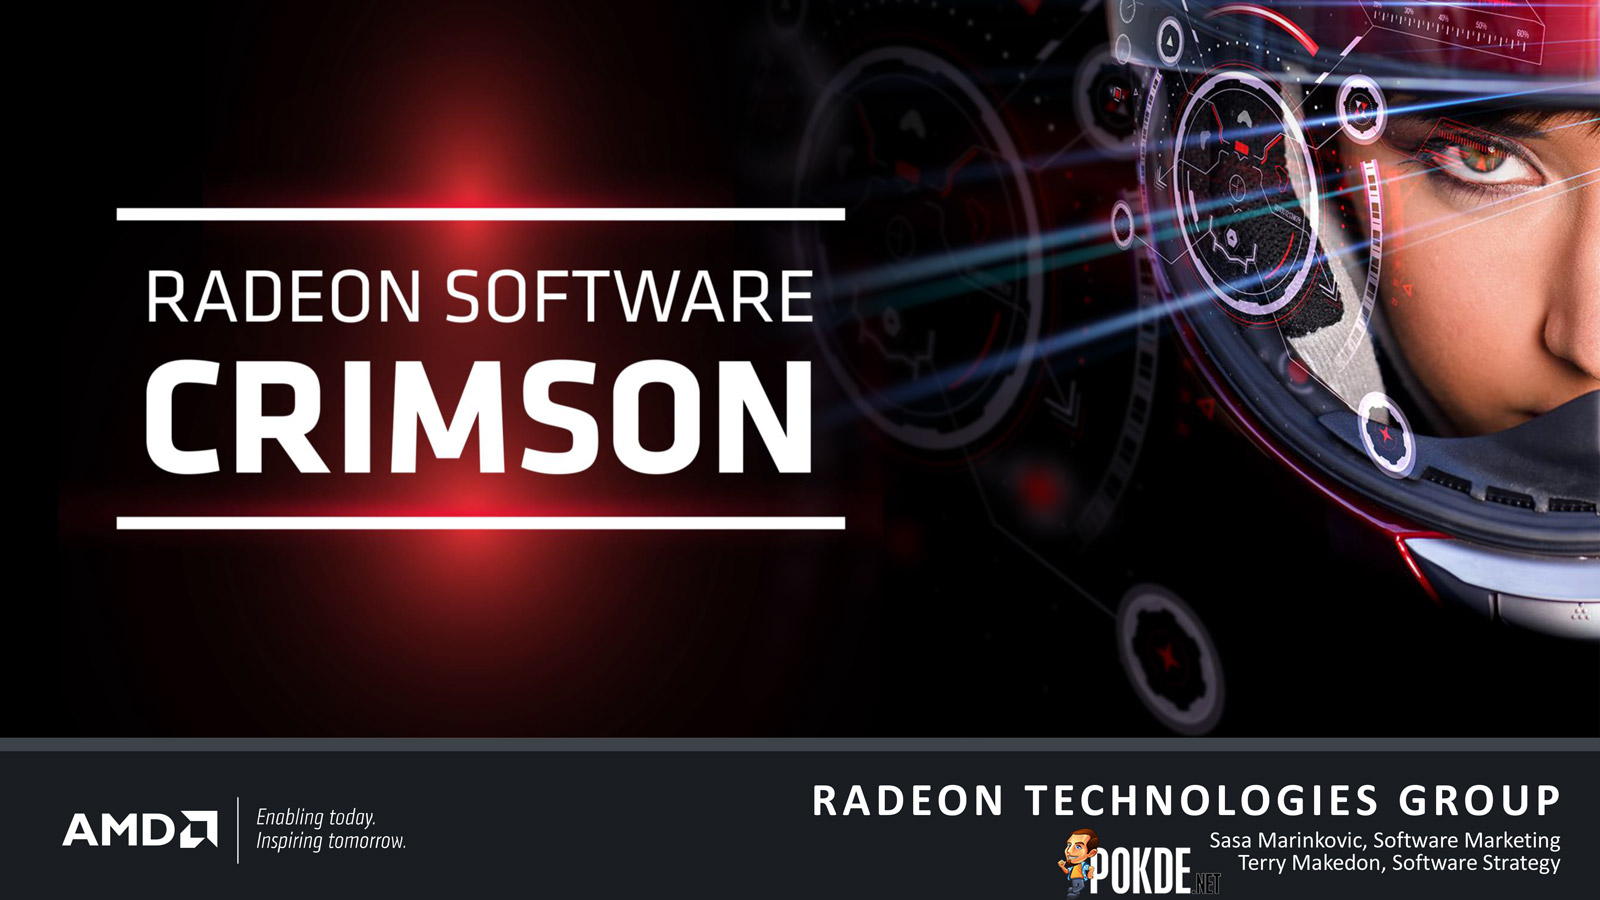 Radeon Technologies Group launched their first product today — Radeon Software Crimson Edition 34